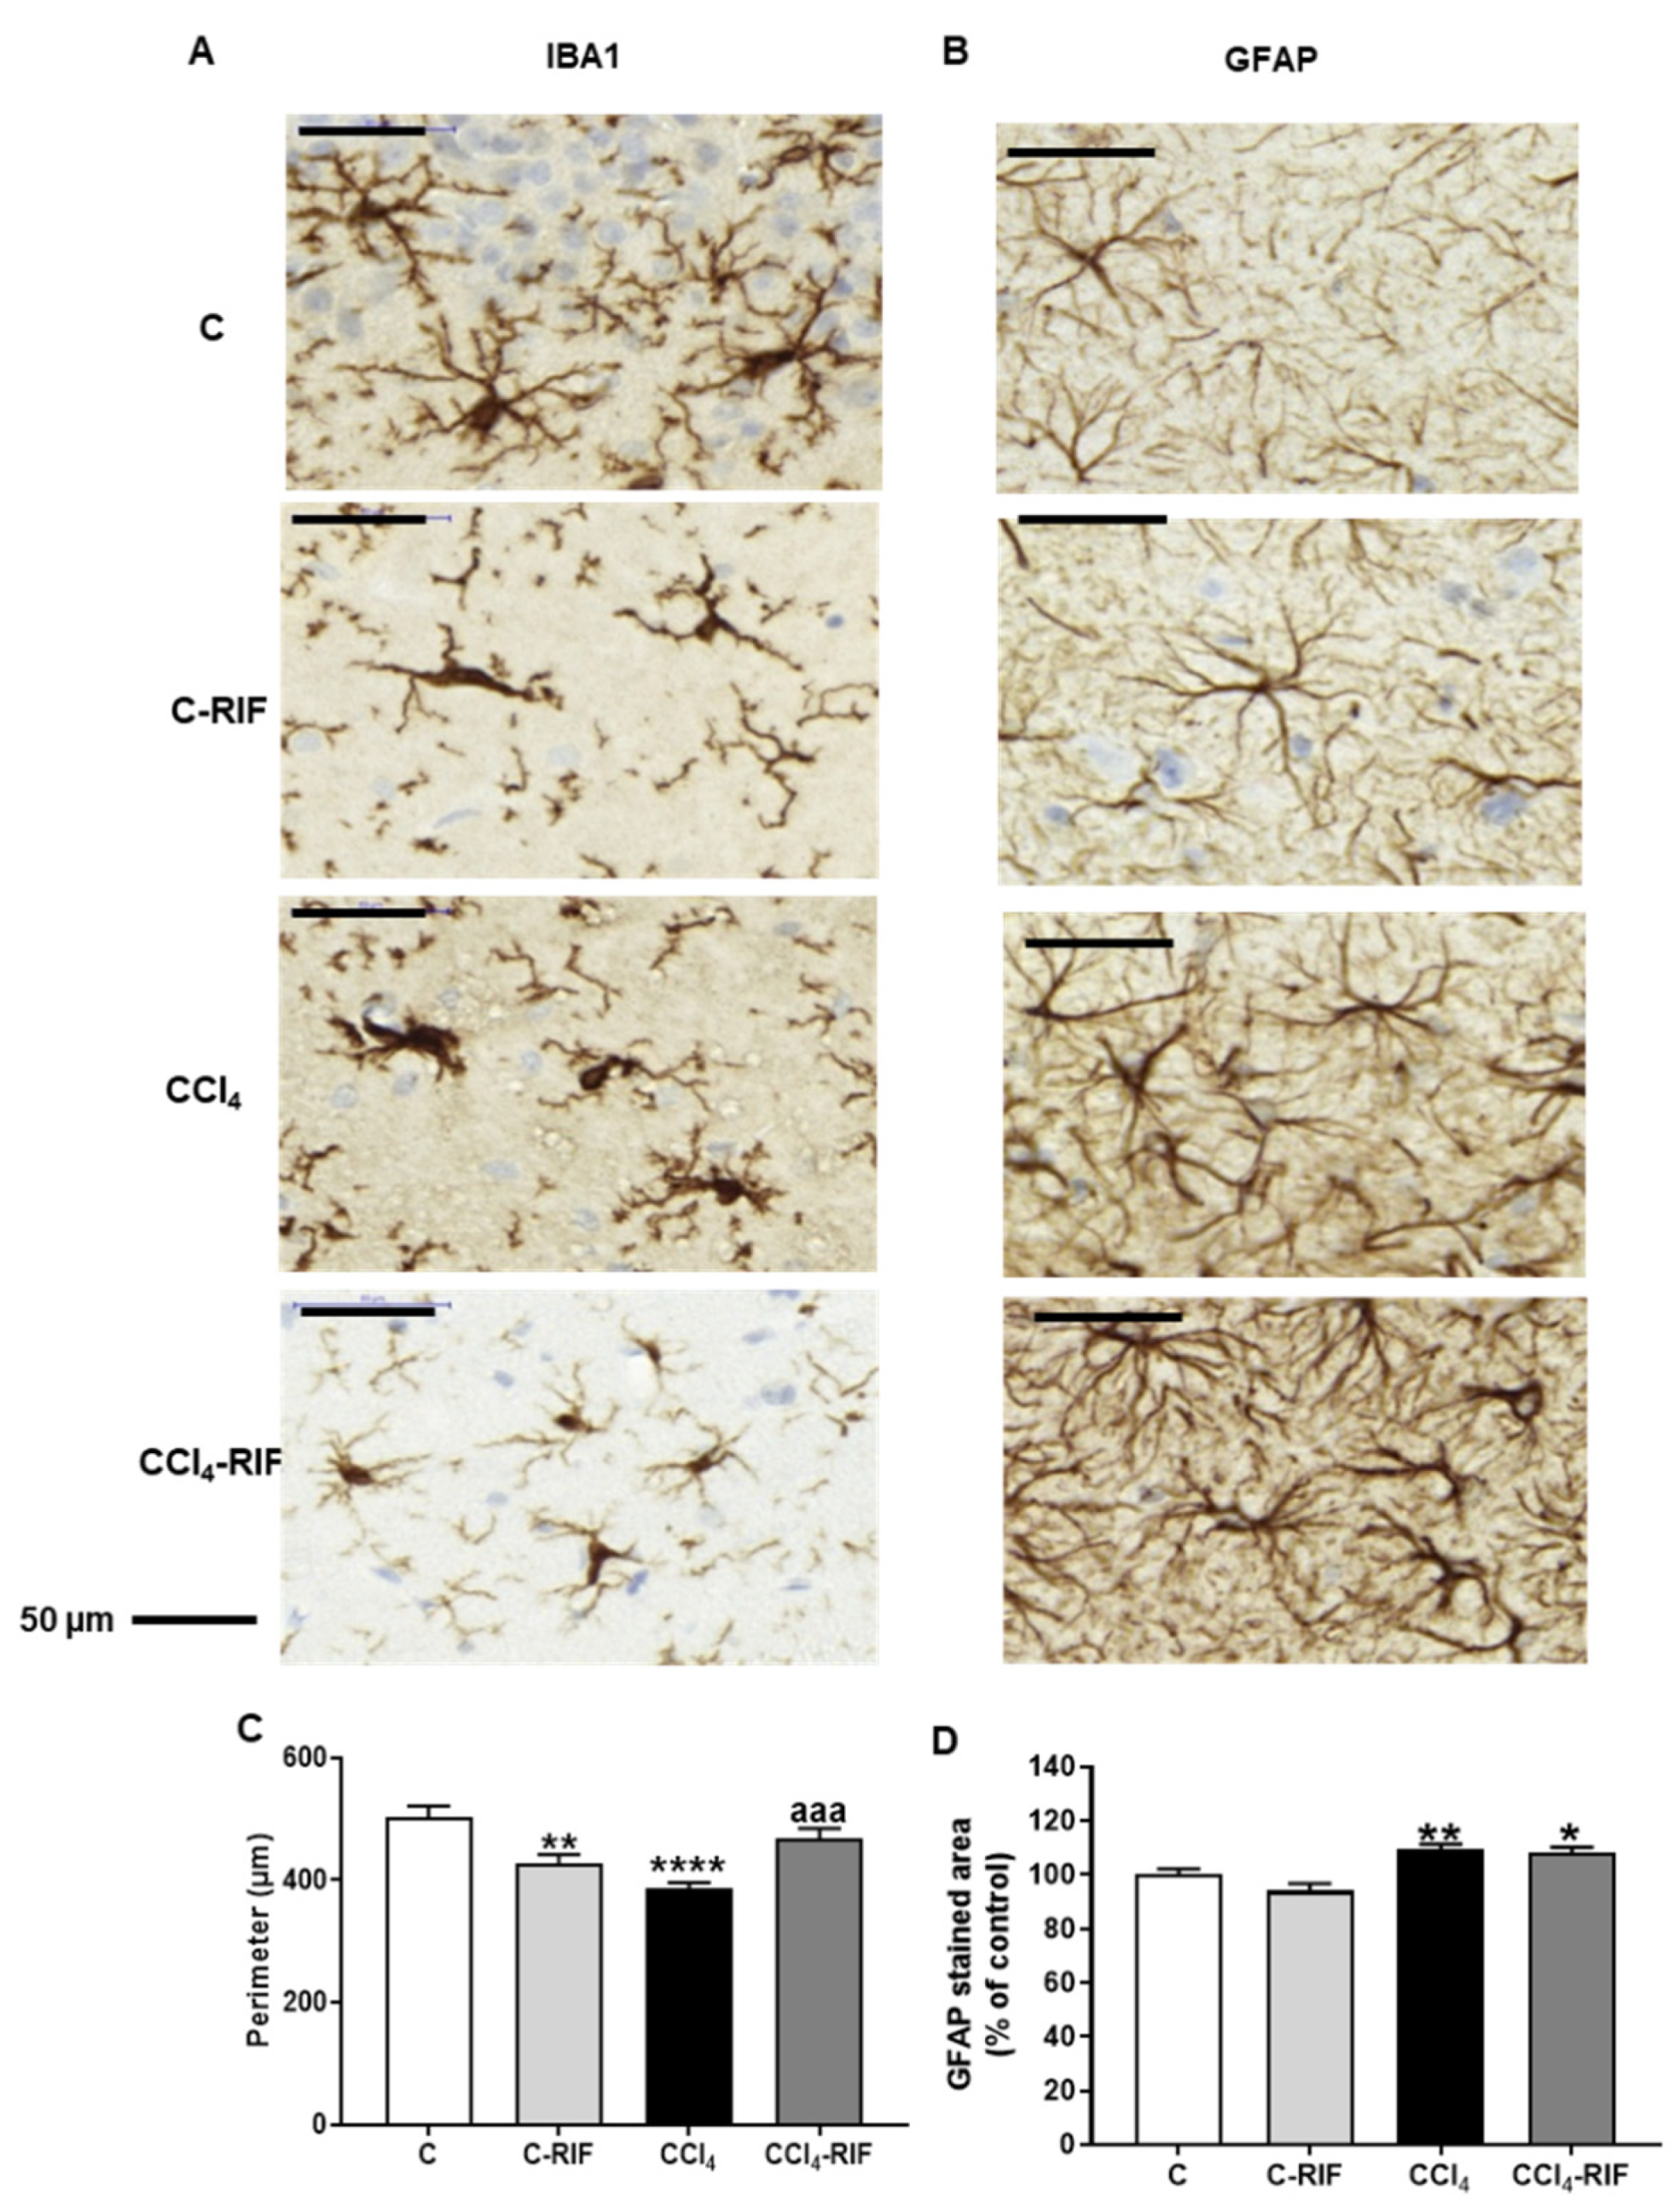 Memory Spatial Free Rats Impairment | Rifaximin Neuroinflammation Biomedicines in and Improves with Learning Liver Full-Text | Damage-Associated